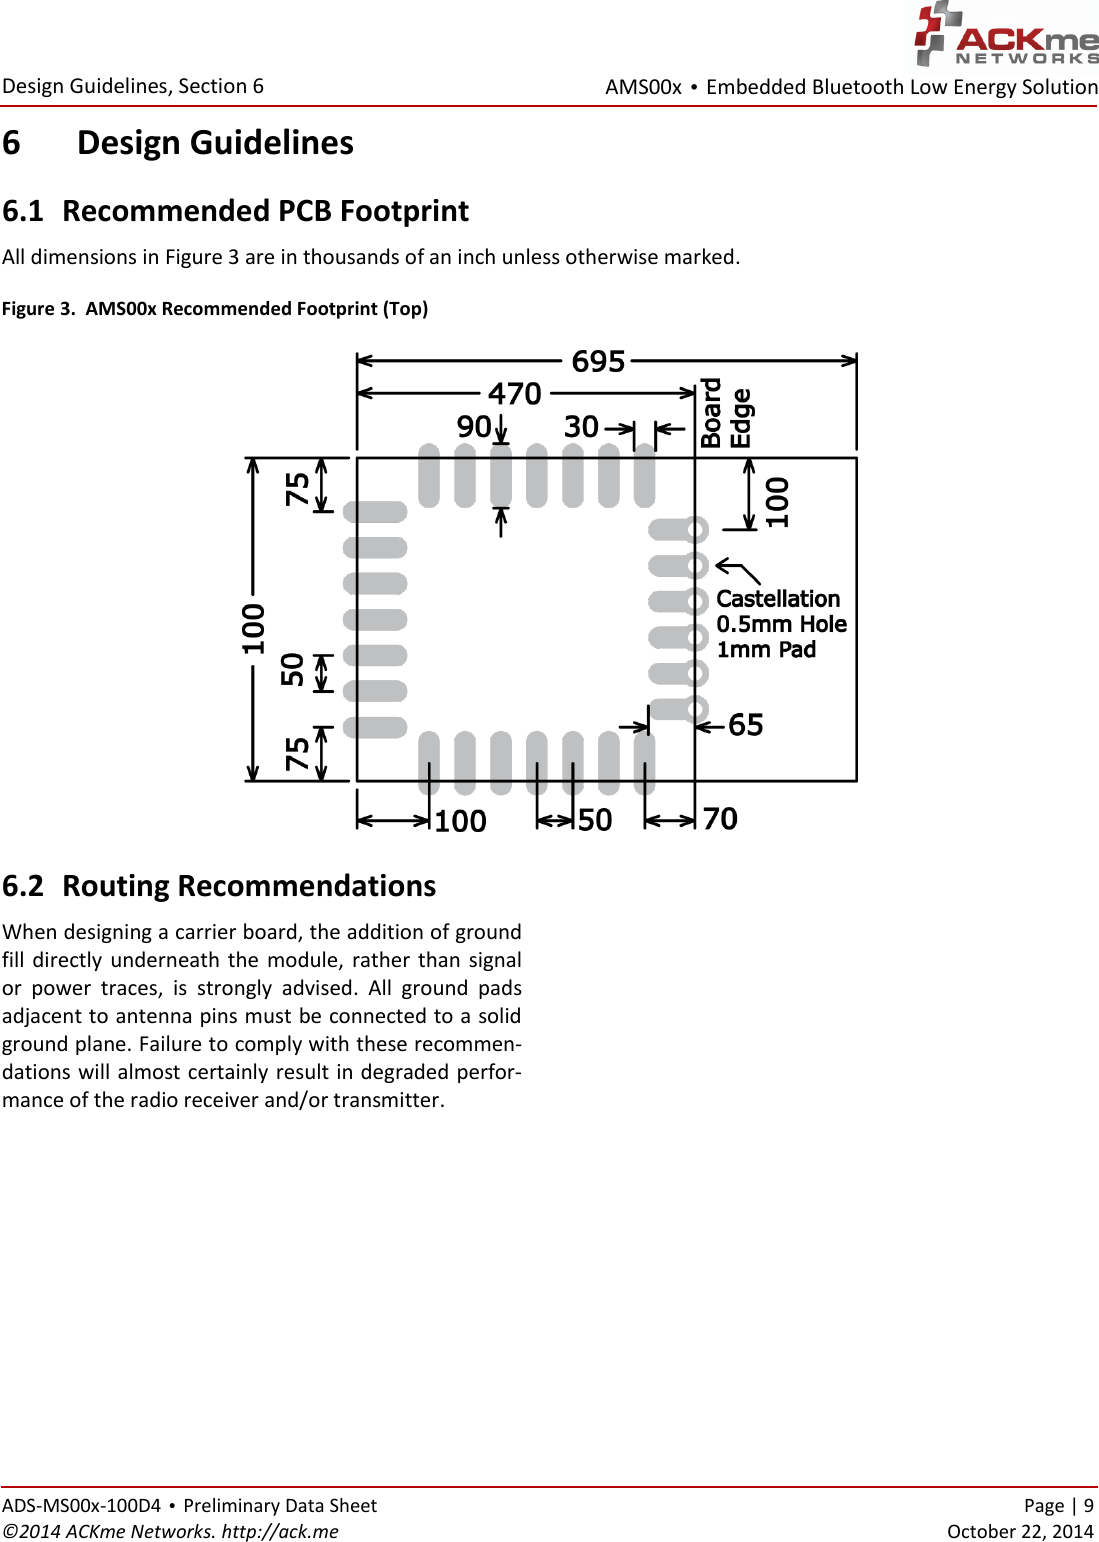 AMS00x • Embedded Bluetooth Low Energy Solution  Design Guidelines, Section 6 ADS-MS00x-100D4 • Preliminary Data Sheet    Page | 9 ©2014 ACKme Networks. http://ack.me    October 22, 2014 6 Design Guidelines 6.1 Recommended PCB Footprint All dimensions in Figure 3 are in thousands of an inch unless otherwise marked. Figure 3.  AMS00x Recommended Footprint (Top)  6.2 Routing Recommendations When designing a carrier board, the addition of ground fill  directly  underneath the module,  rather  than  signal or  power  traces,  is  strongly  advised.  All  ground  pads adjacent to antenna pins must be connected to a solid ground plane. Failure to comply with these recommen-dations will almost certainly result in degraded perfor-mance of the radio receiver and/or transmitter.  